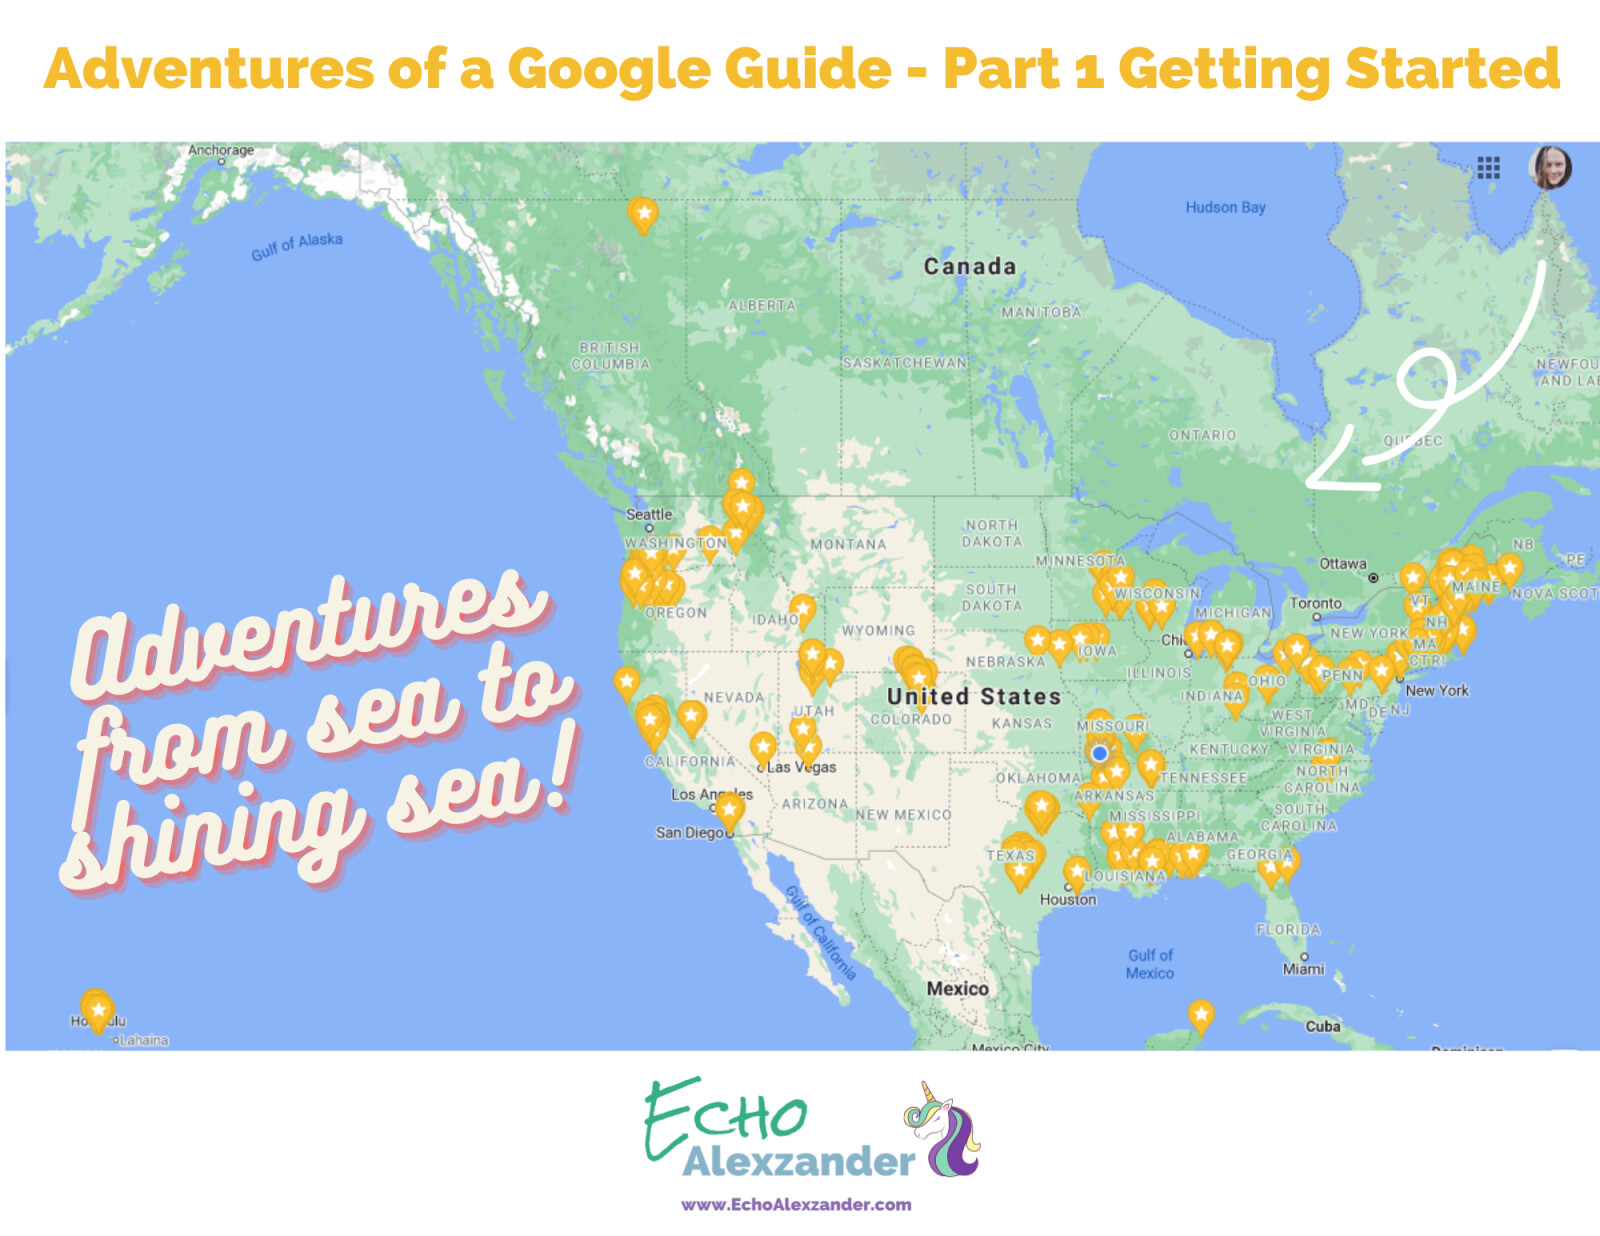 Adventures of a Google Guide - Part 1 Getting Started